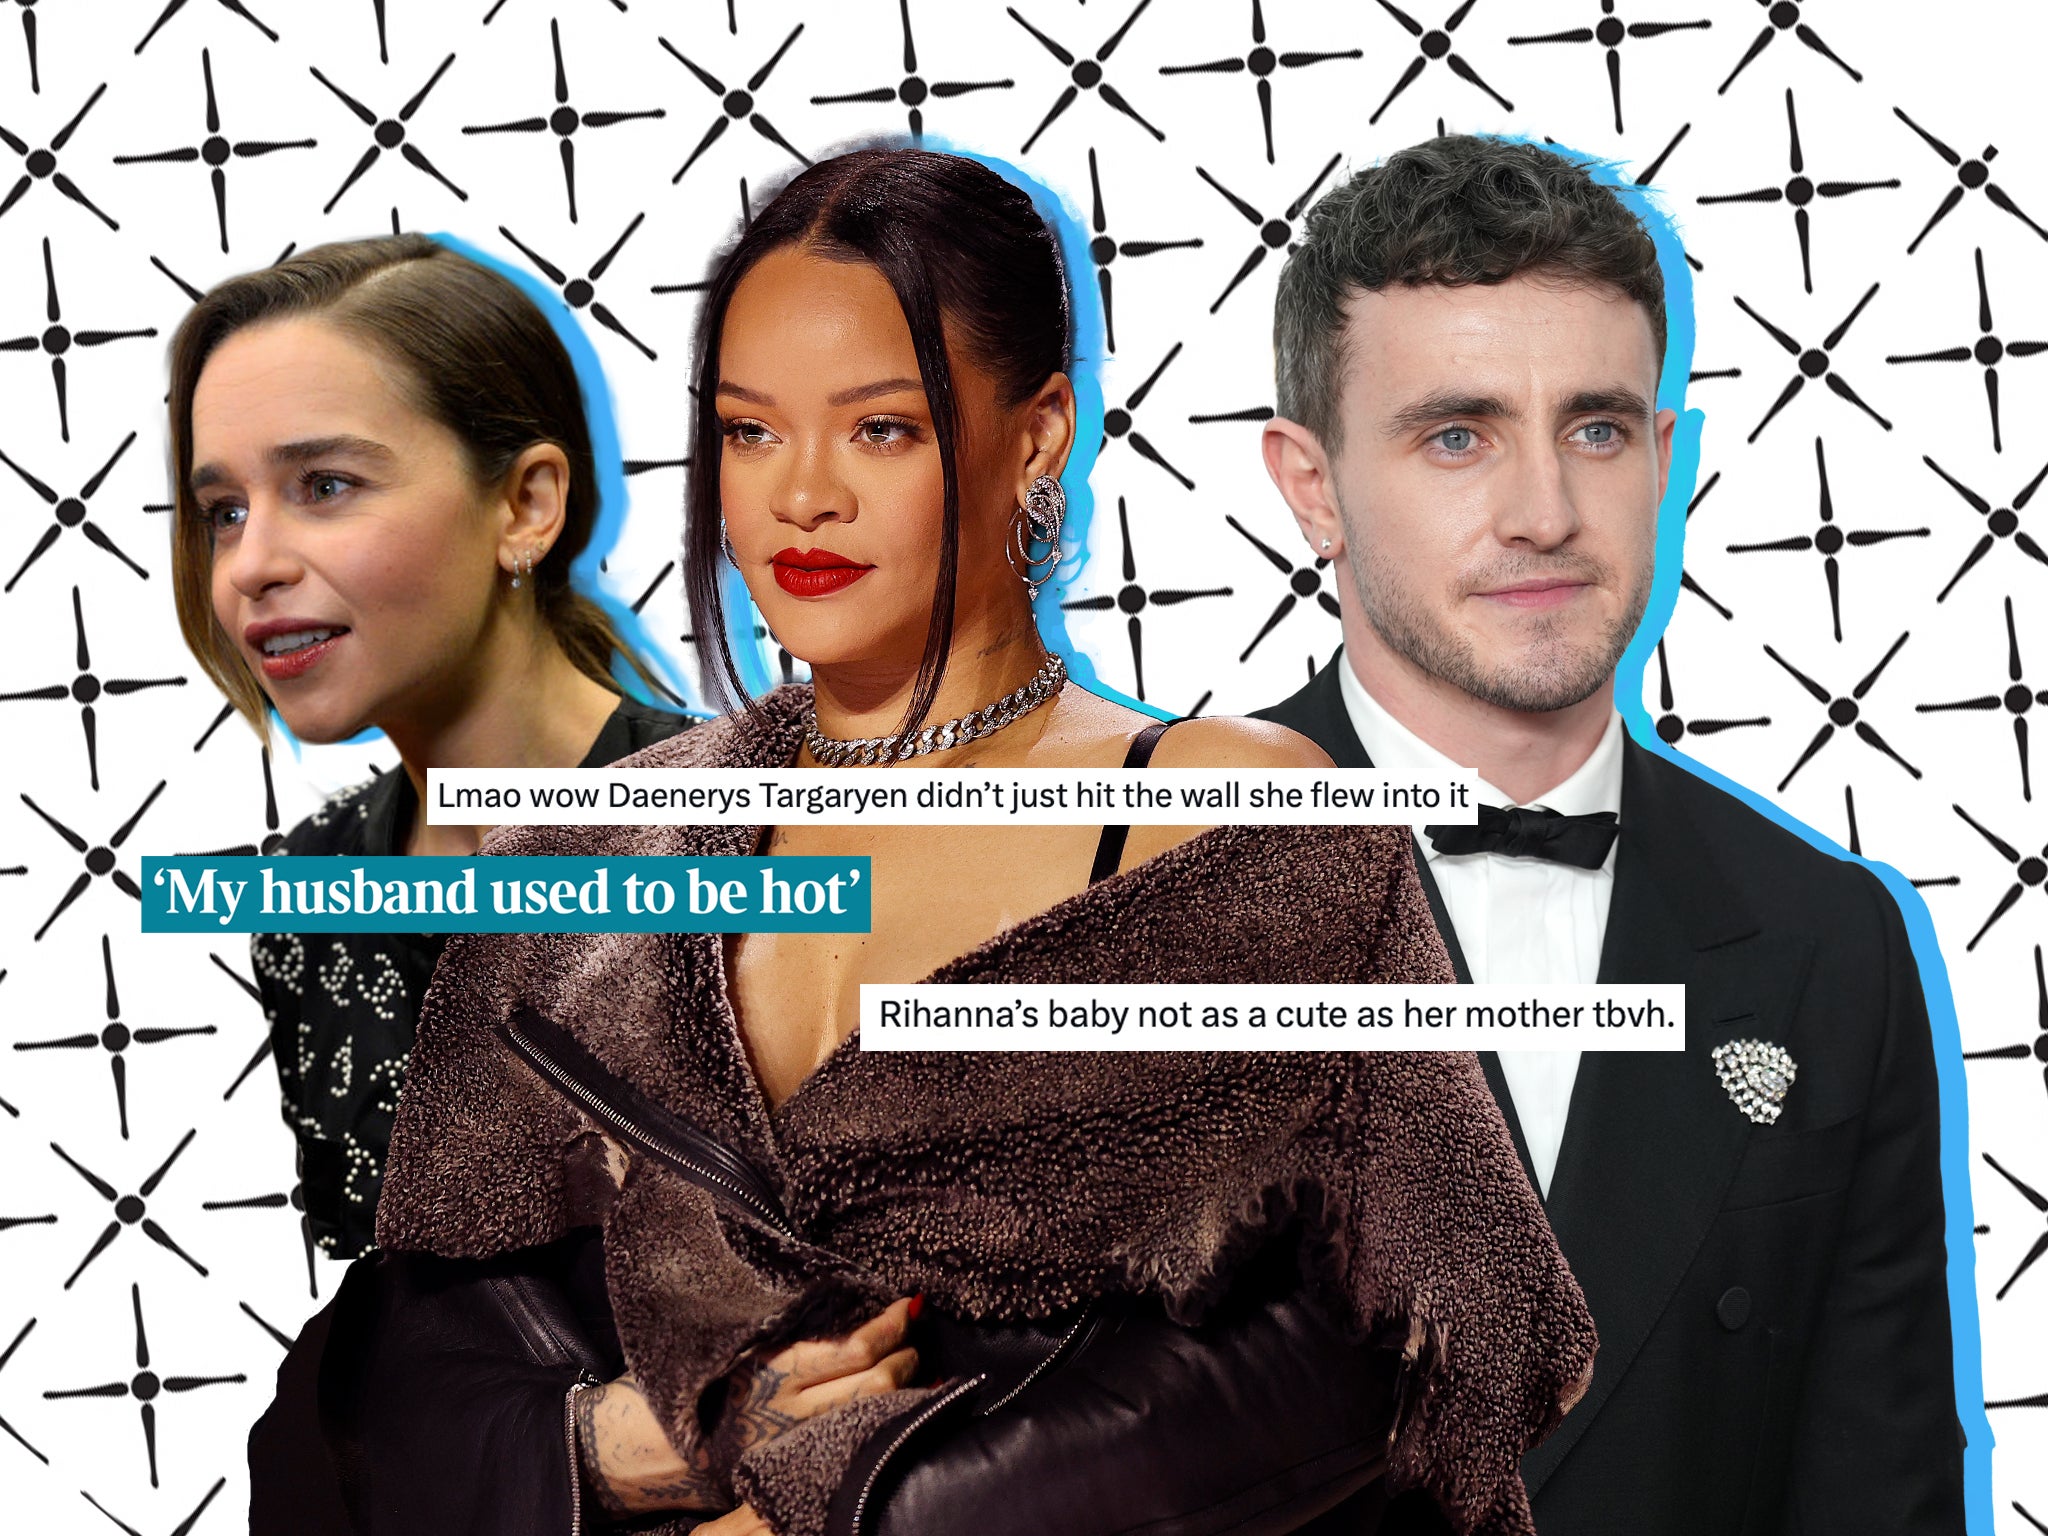 Emilia Clarke, Rihanna and Paul Mescal have all been the subject of cruel viral tweets in recent weeks